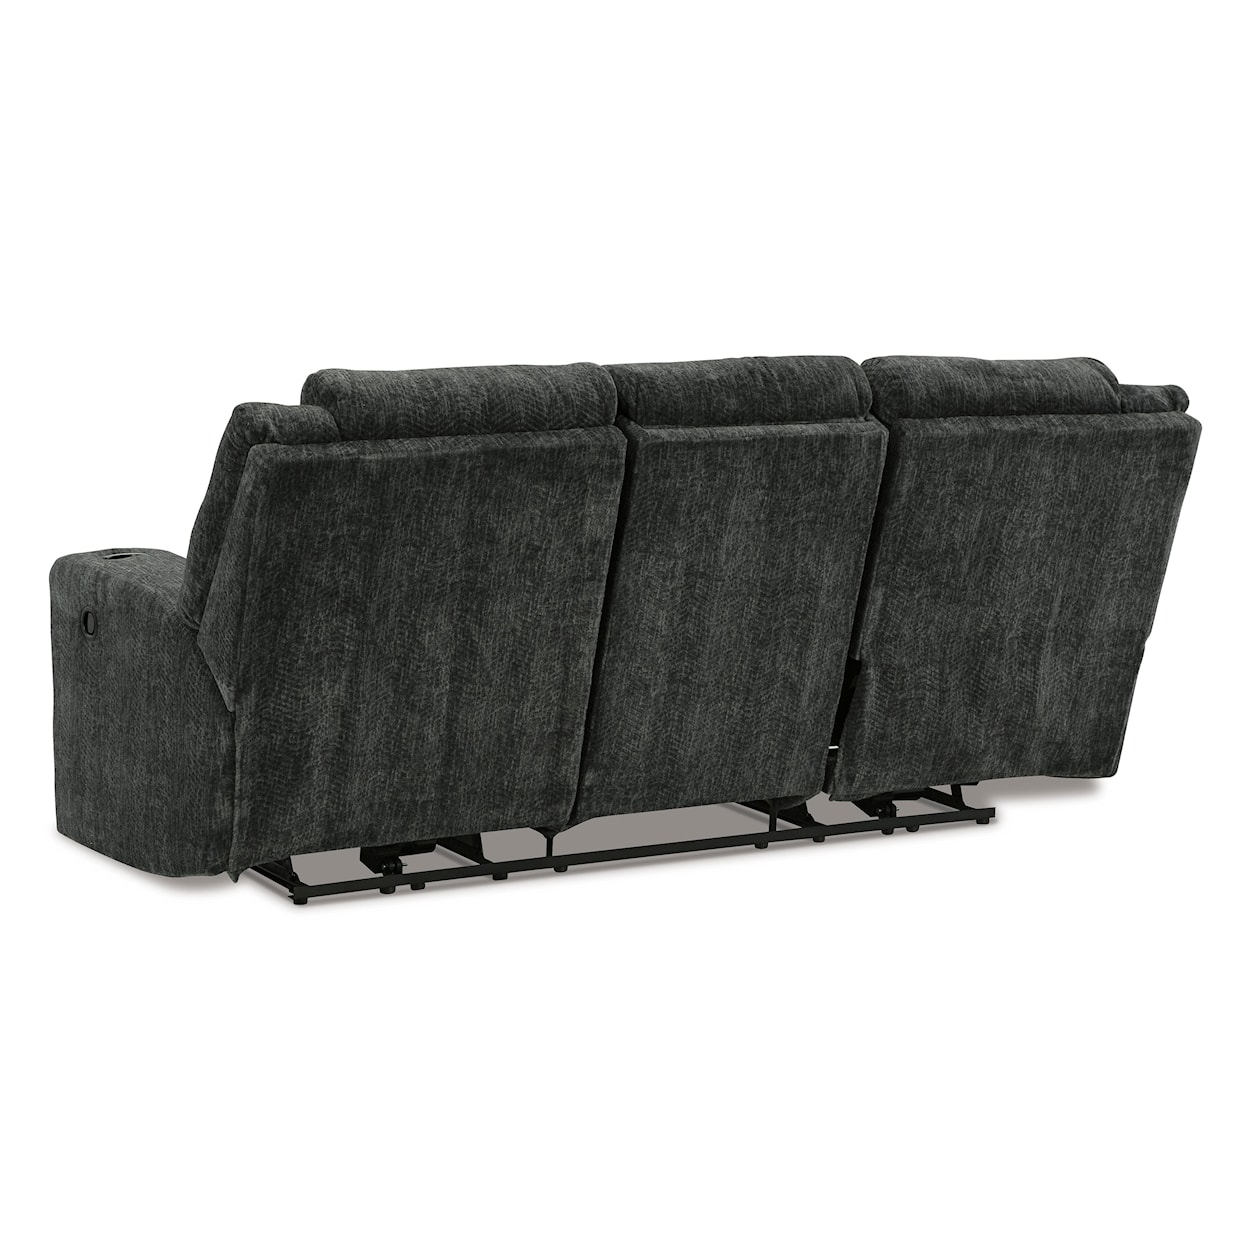 Signature Design by Ashley Furniture Martinglenn Reclining Sofa with Drop Down Table